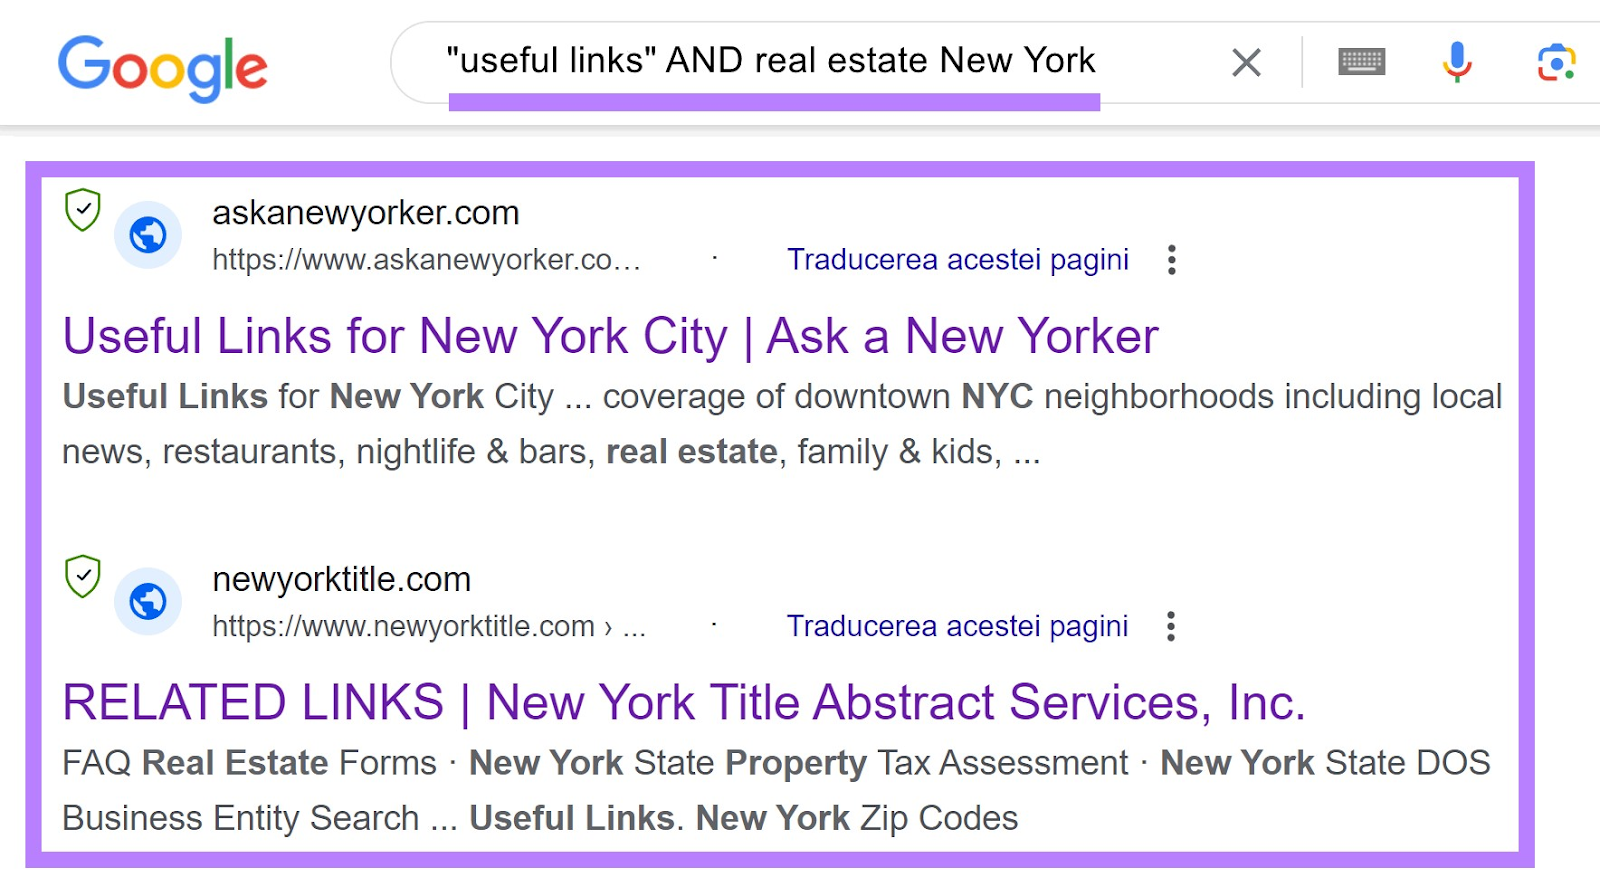 Google search for: "useful links" AND real estate New York